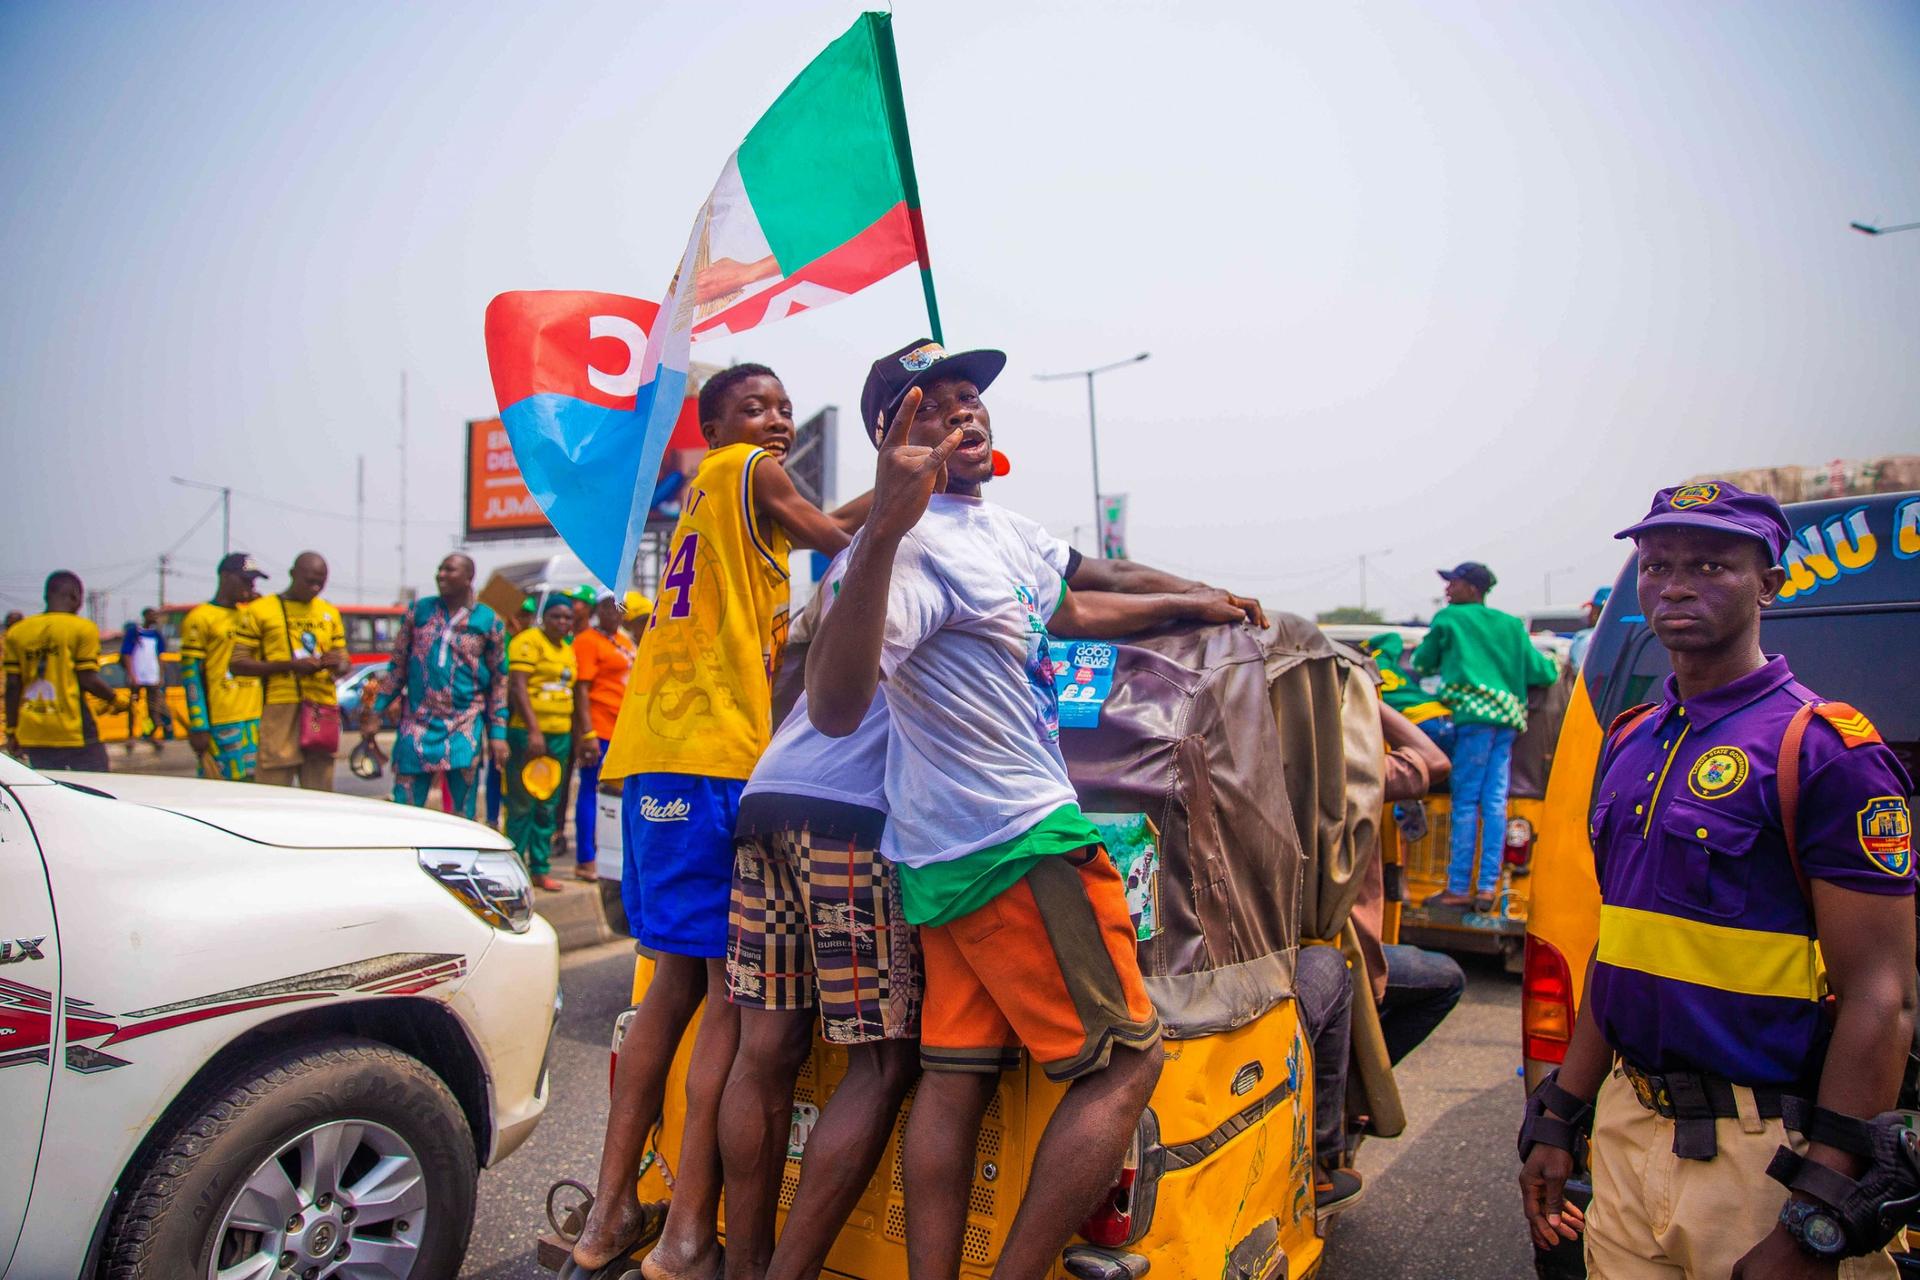 Supporters of Bola Ahmed Tinubu, the presidential candidate of the All Progressives Congress, Nigeria ruling party, rides on a rickshaw outside the venue of an election campaign rally at the Teslim Balogun Stadium in Lagos Nigeria, Tuesday, Feb. 21, 2023.